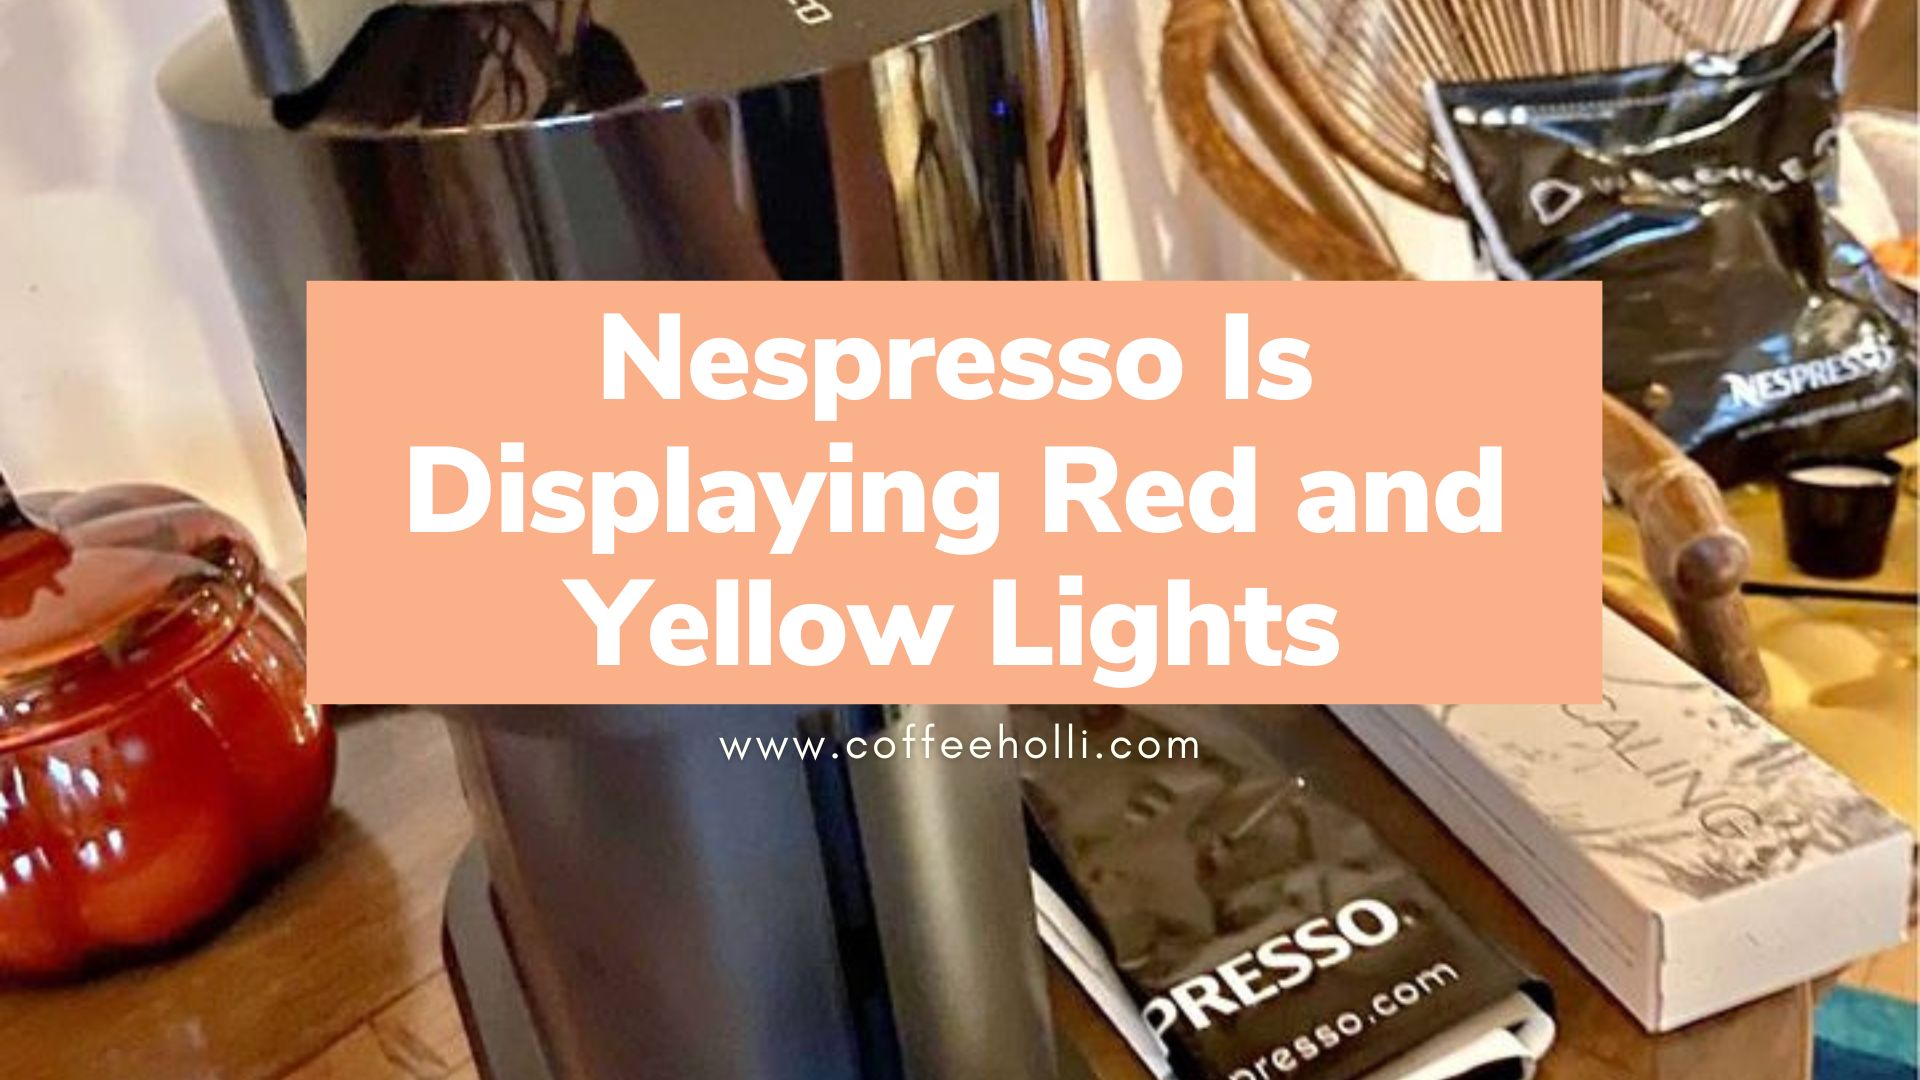 Nespresso Is Displaying Red and Yellow Lights